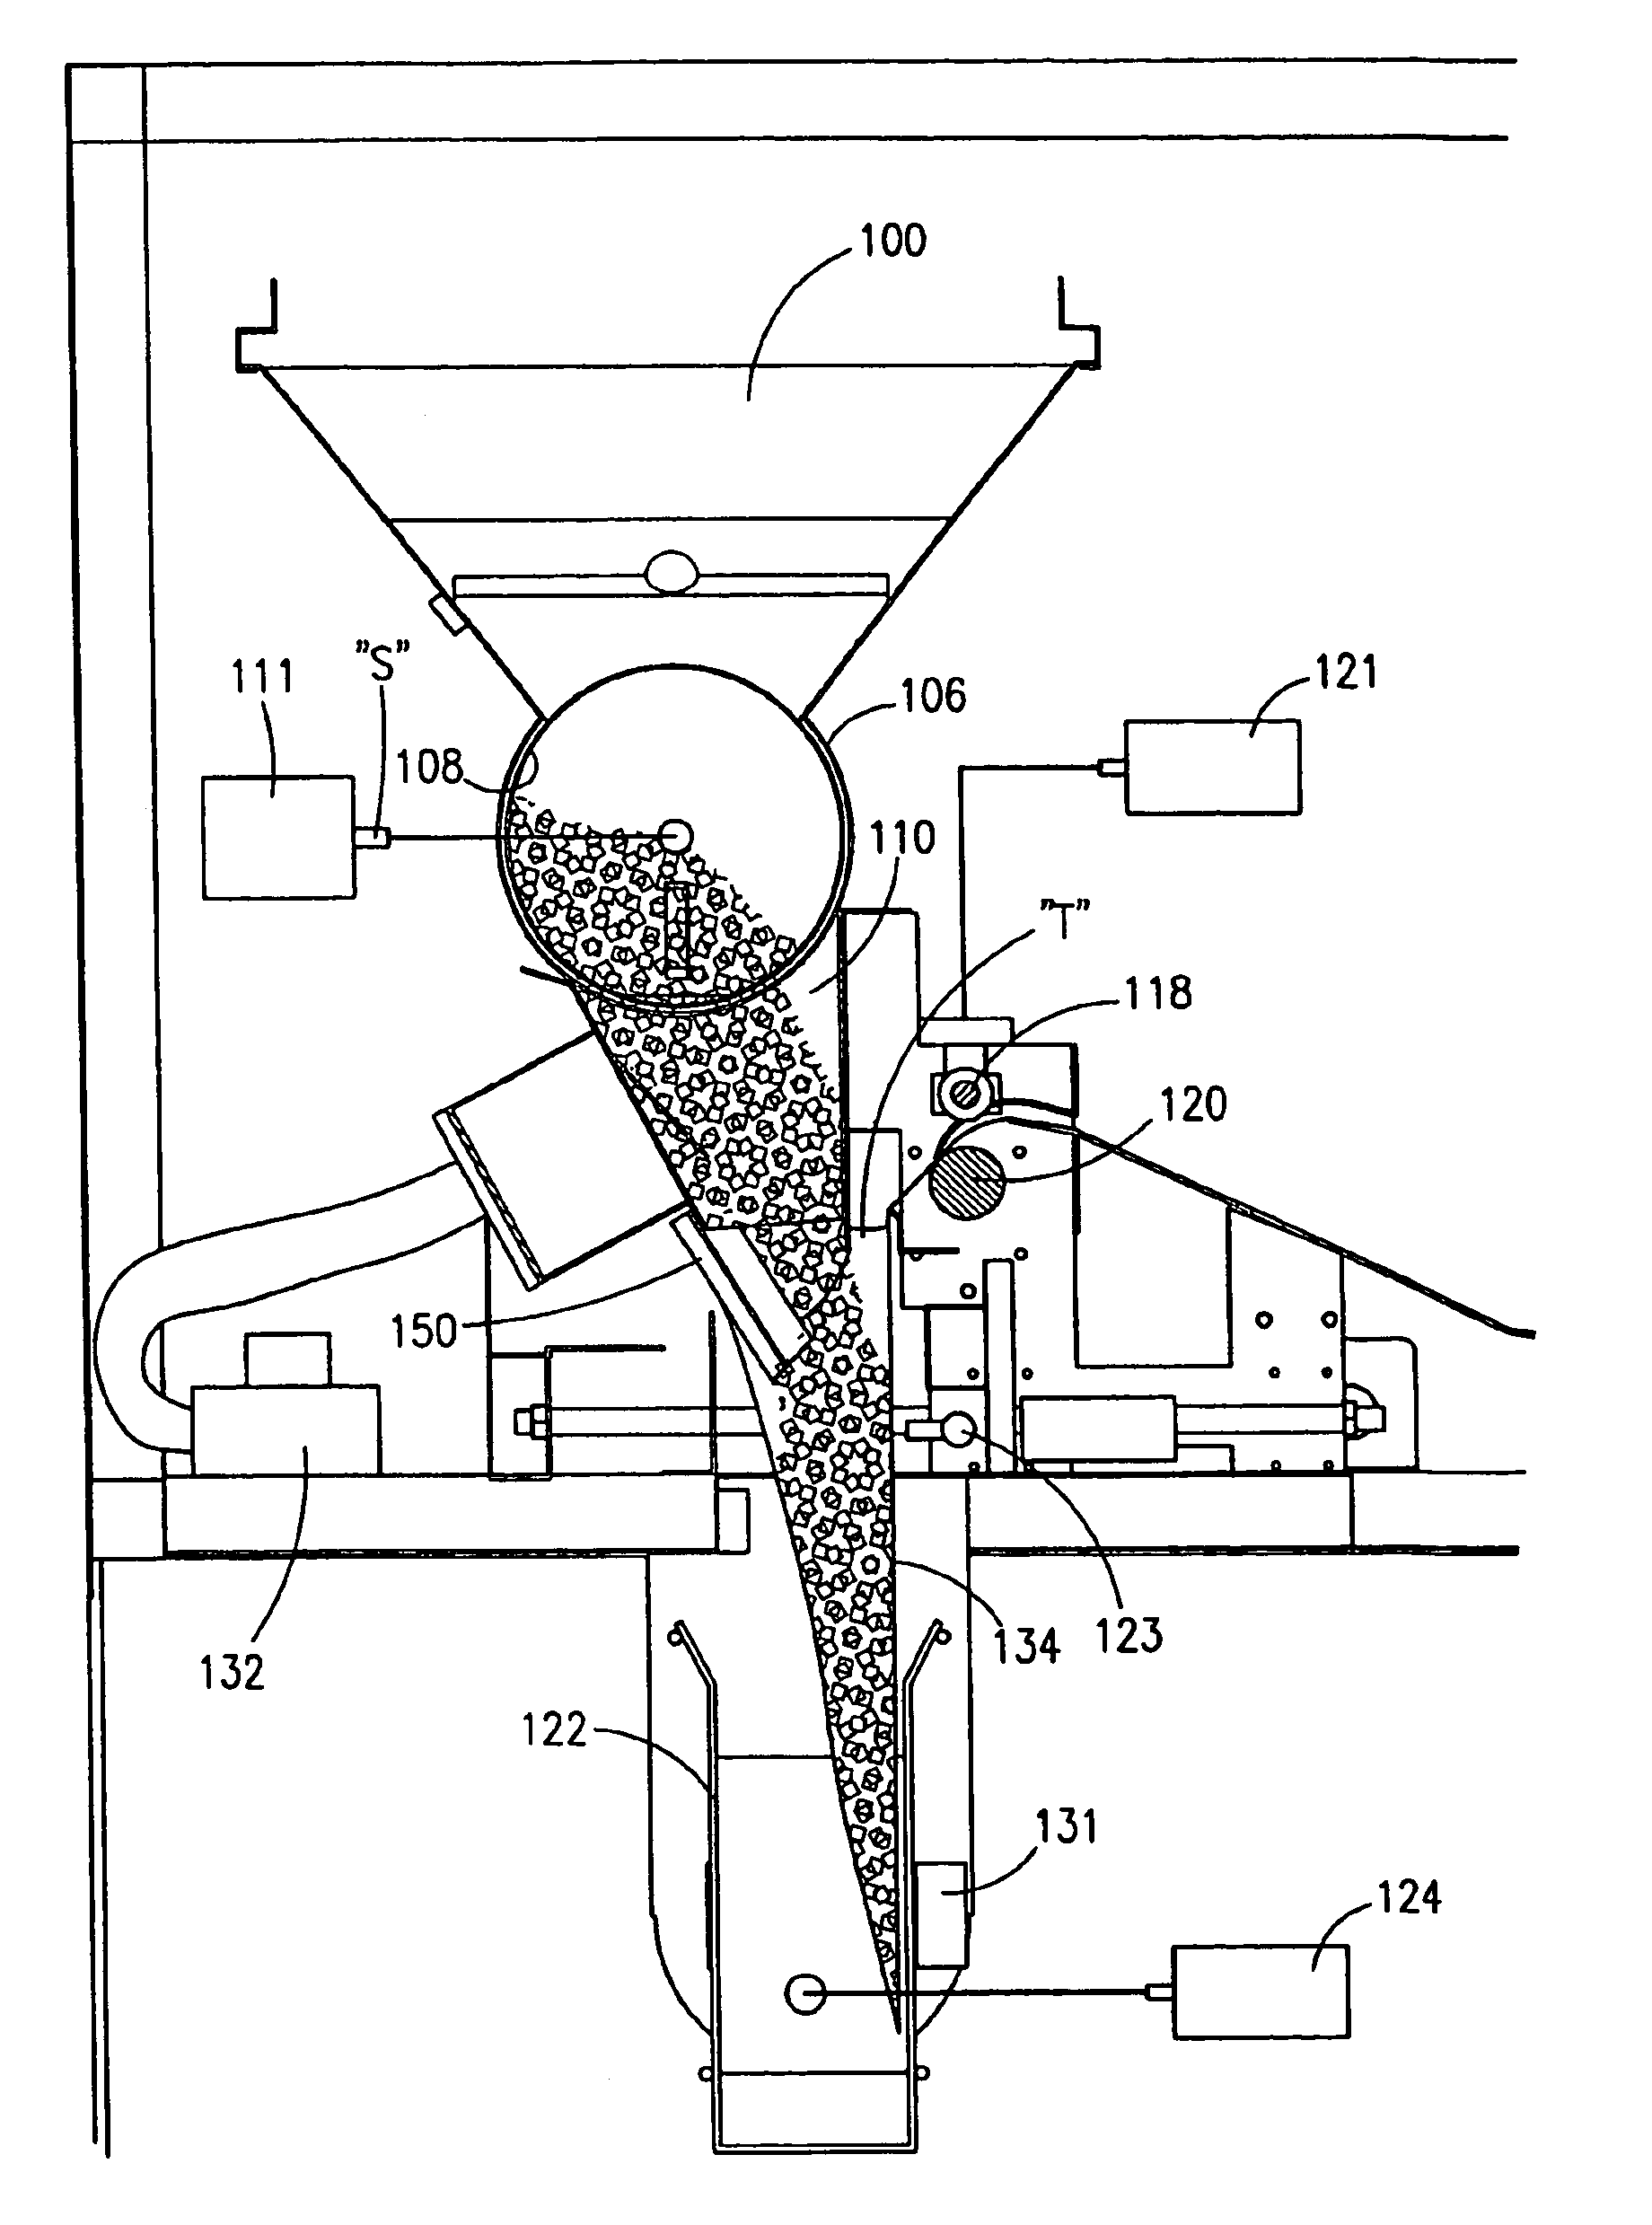 Ice bagging system and method